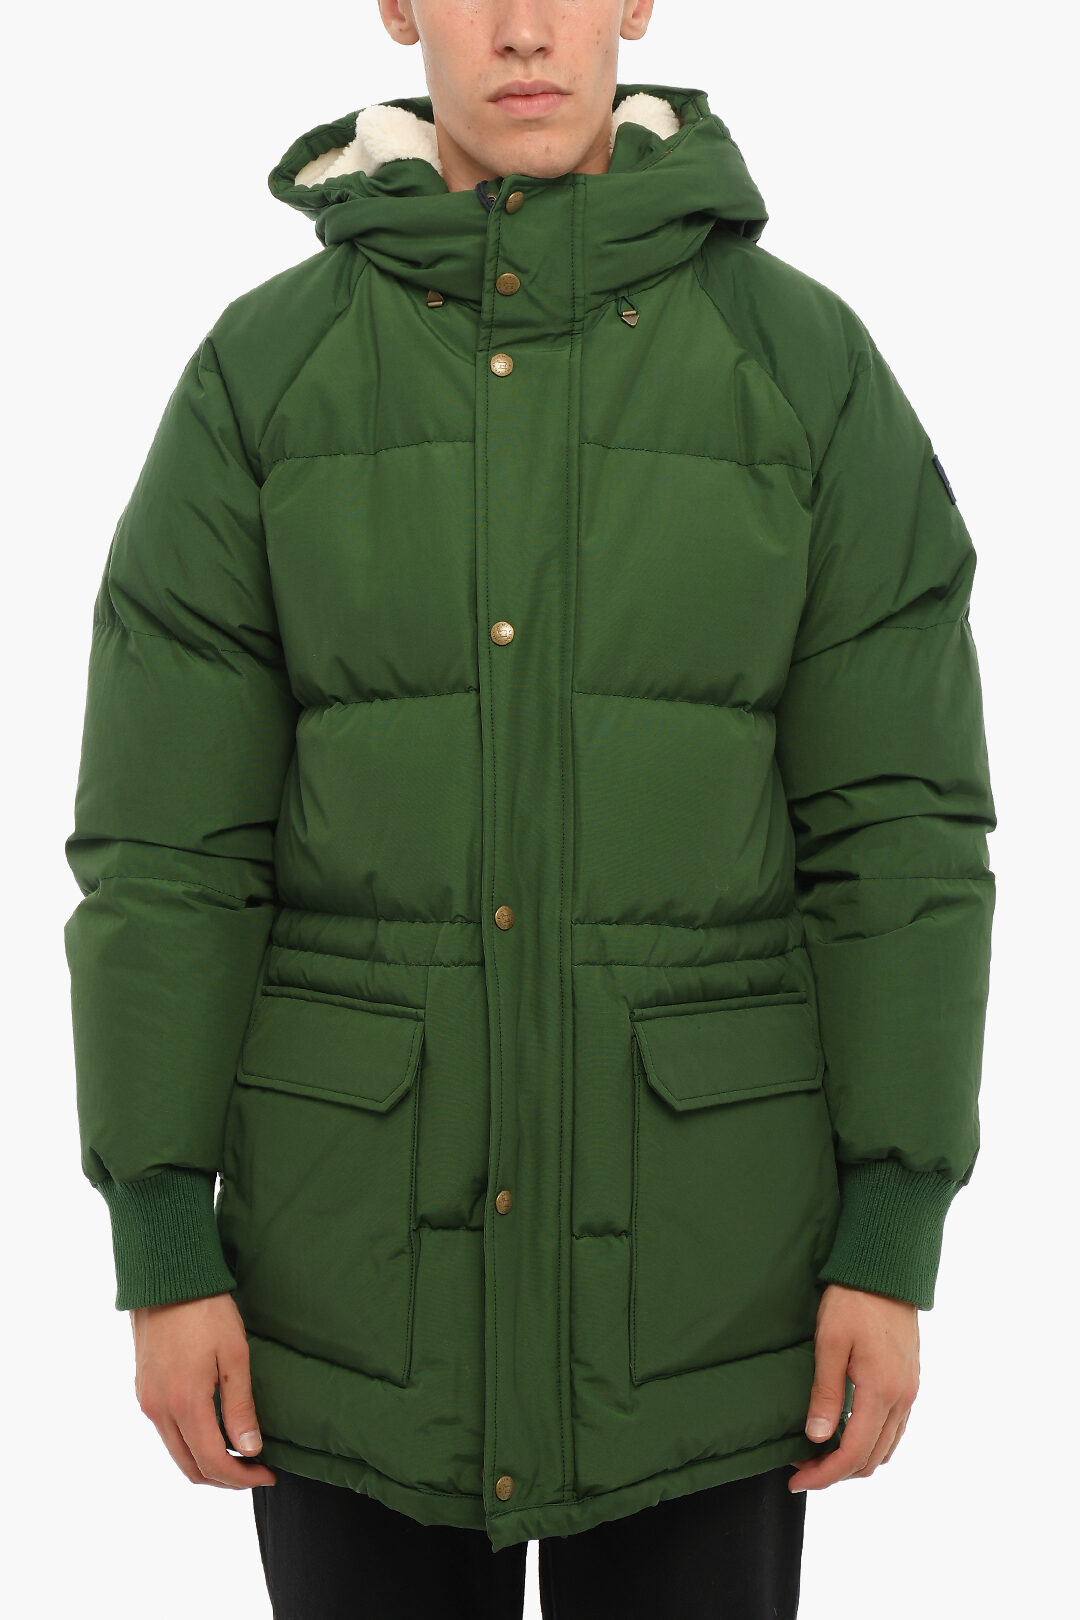 Woolrich Aime' Leon Dore Front Buttoning Down Jacket